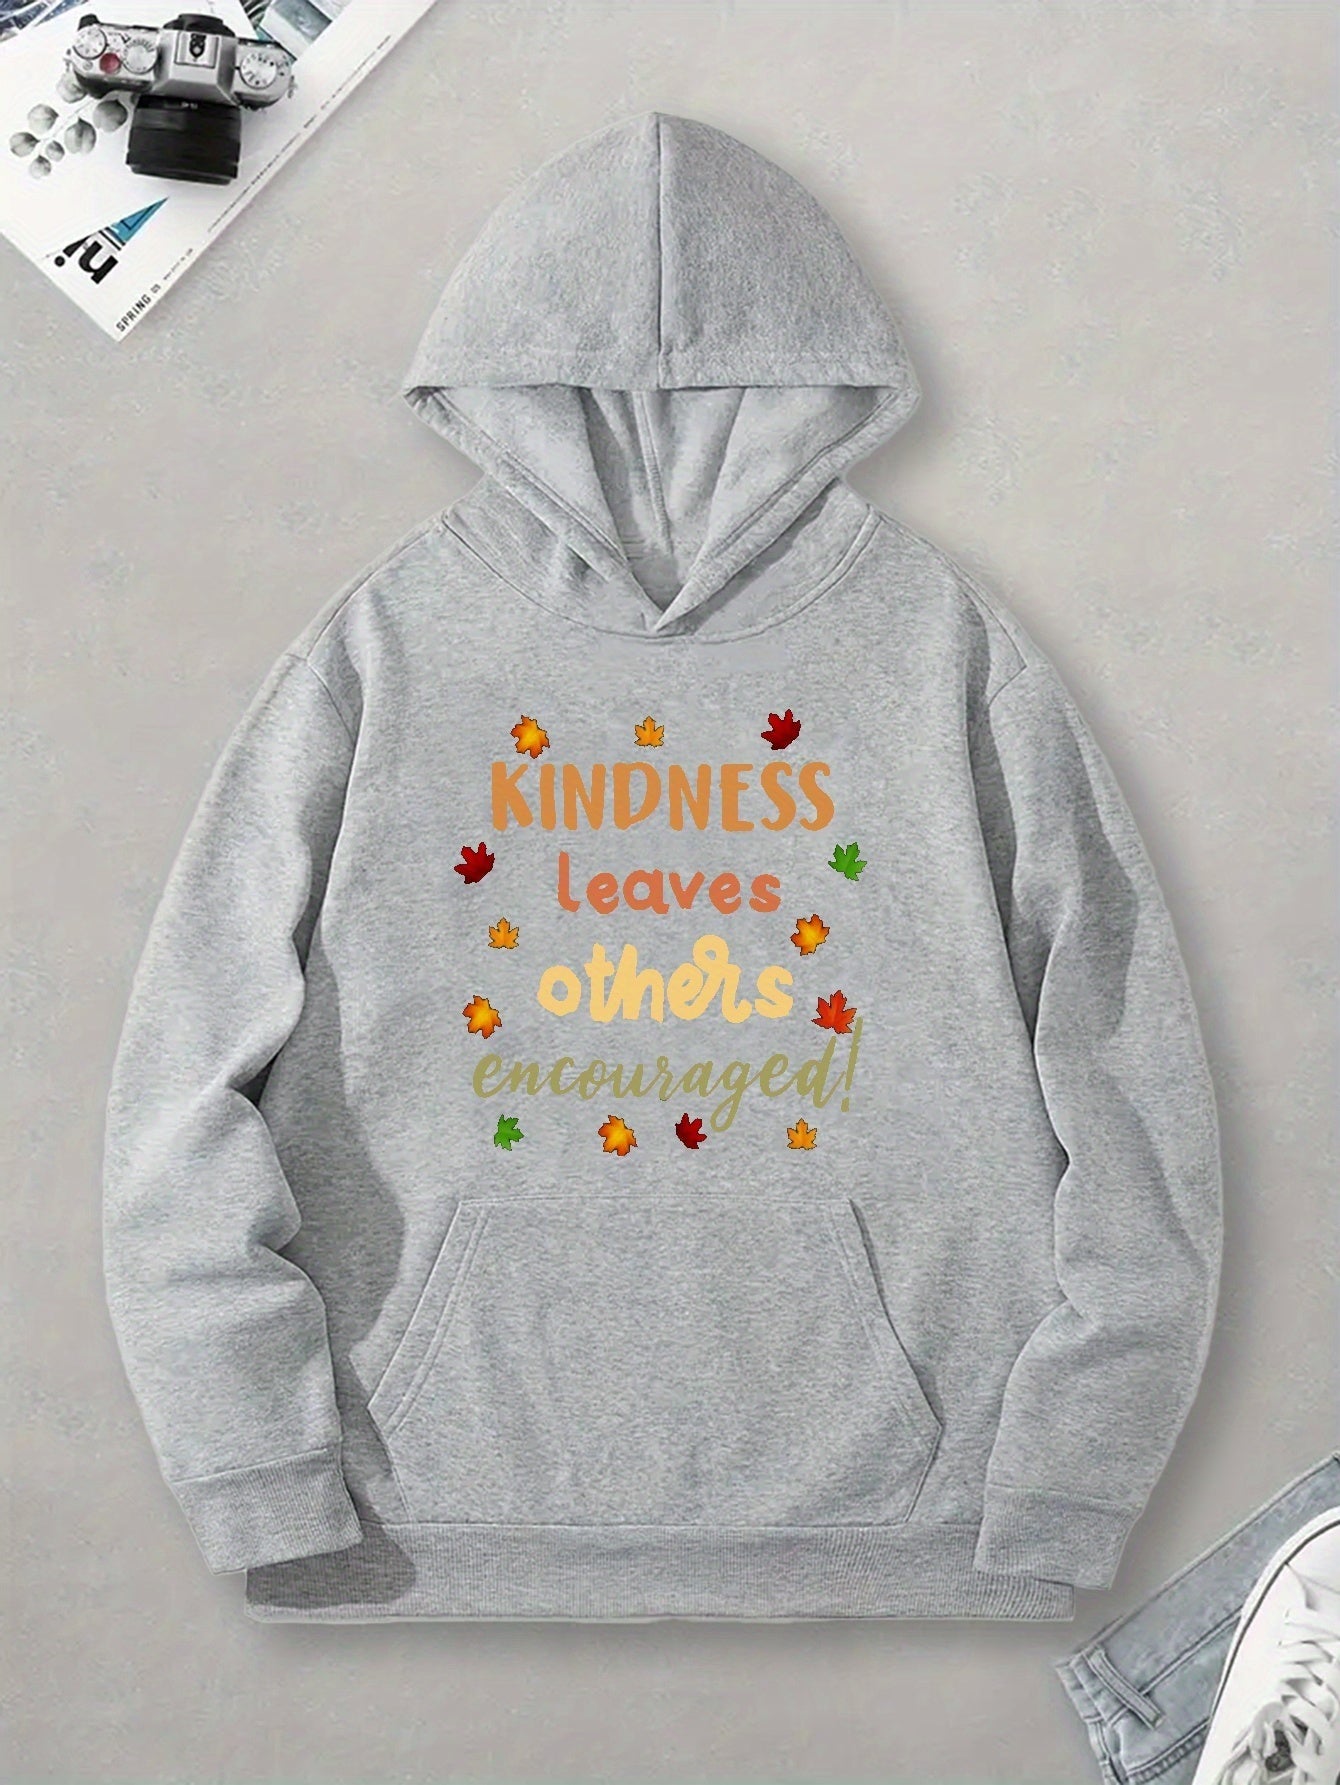 KINDNESS LEAVES OTHERS ENCOURAGED Women's Christian Pullover Hooded Sweatshirt claimedbygoddesigns